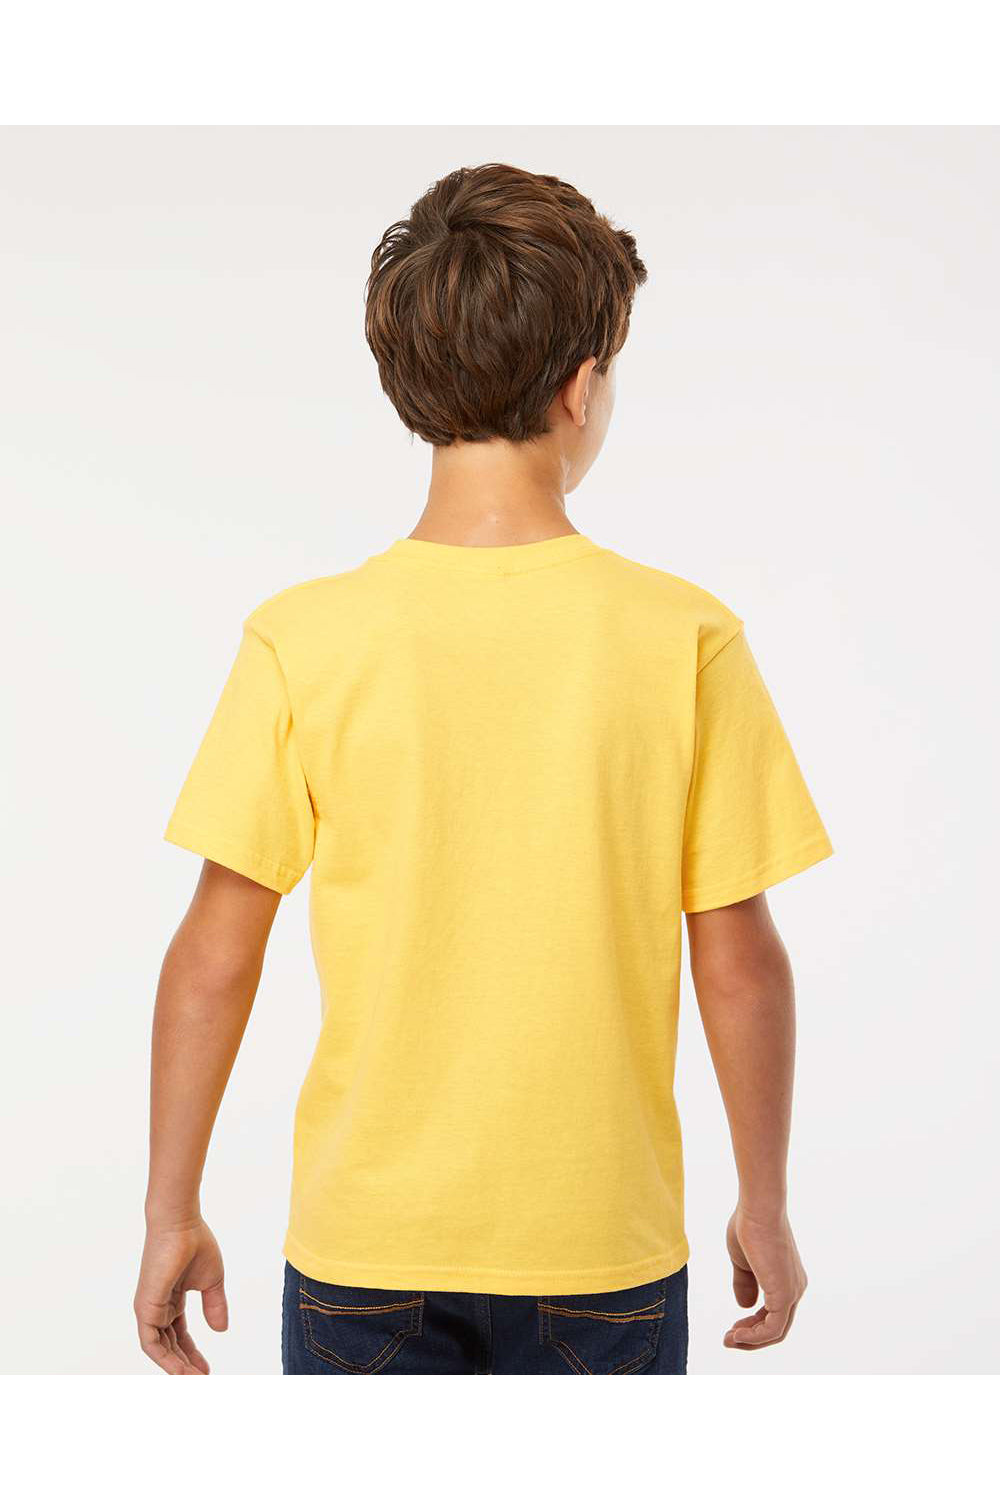 M&O 4850 Youth Gold Soft Touch Short Sleeve Crewneck T-Shirt Yellow Model Back